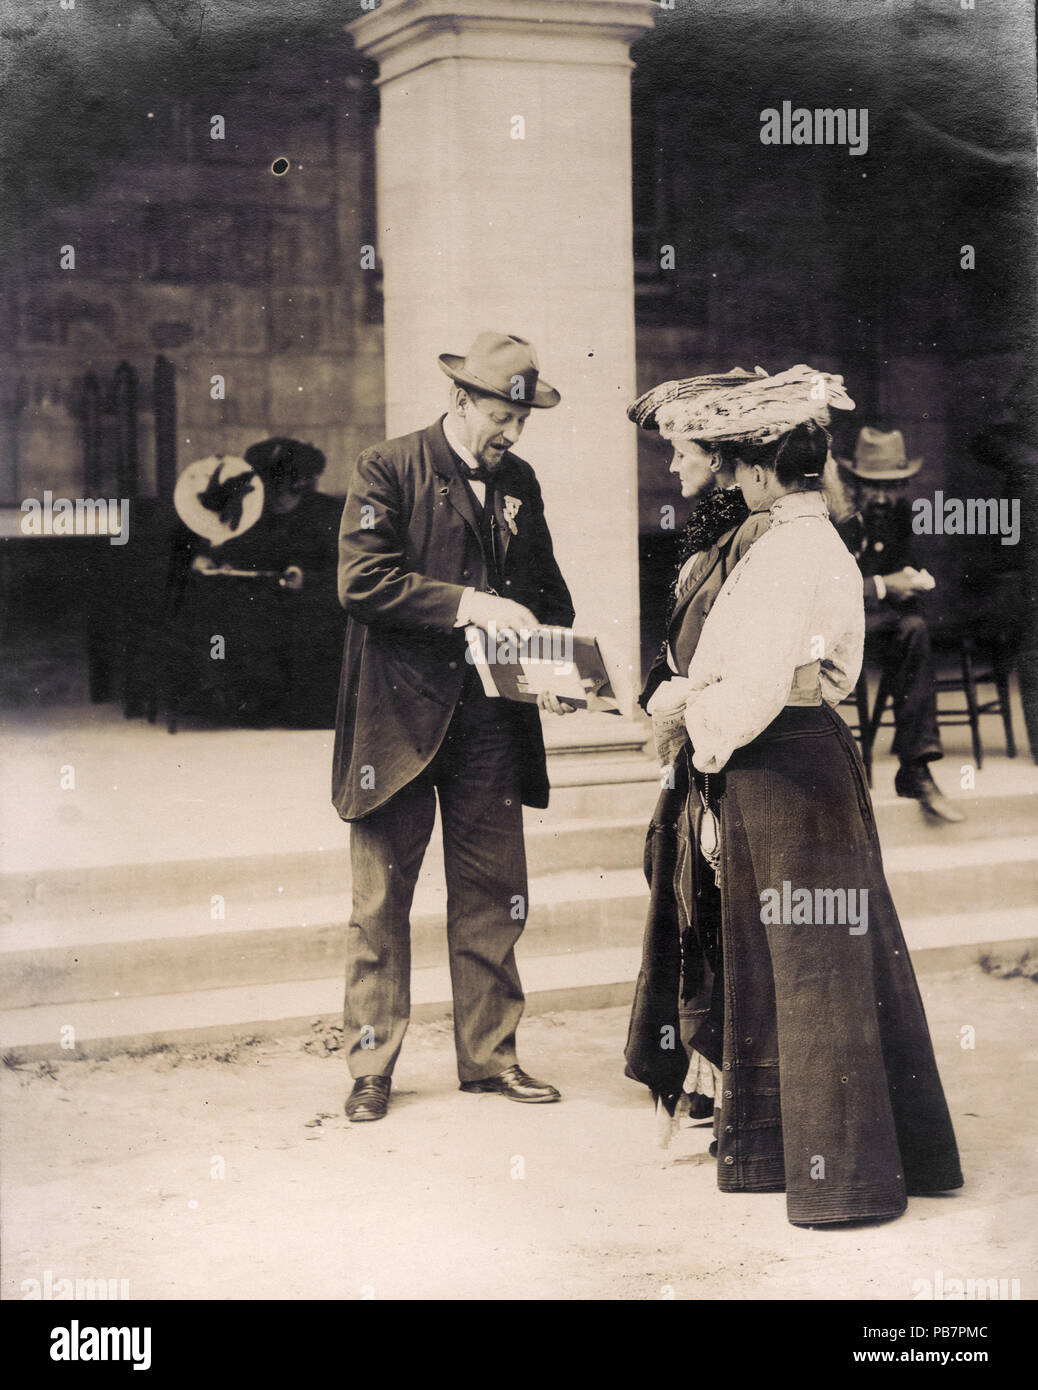 1229 Professor of Physiography, Albrecht Penck of Vienna talking with two women visitors in front of Hall of Congresses at the 1904 World's Fair Stock Photo